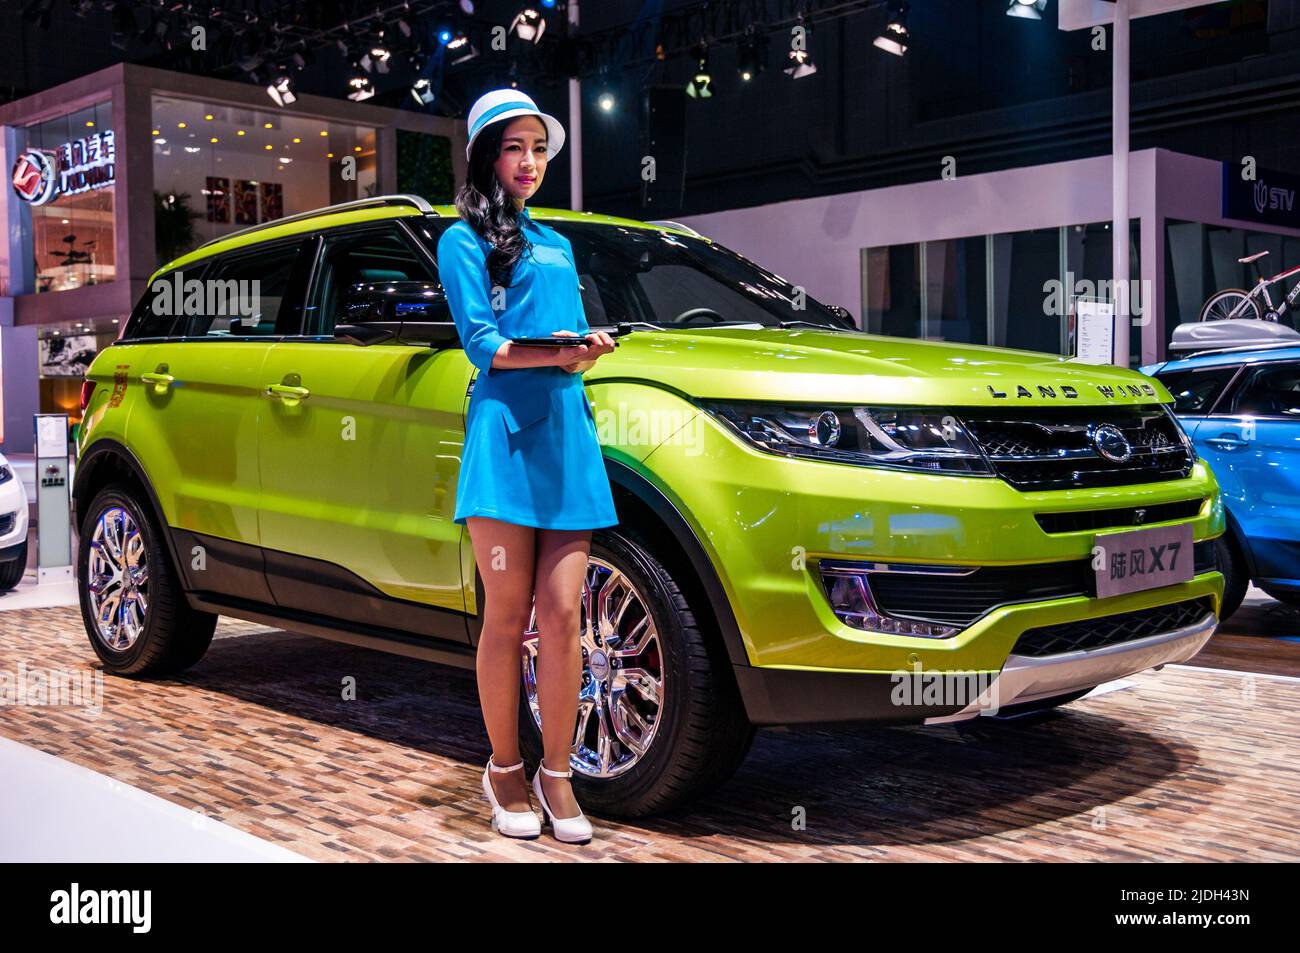 A model stands in front of the Landwind X7, a Range Rover Evoque clone, at the 2015 Shanghai Auto Show. Stock Photo